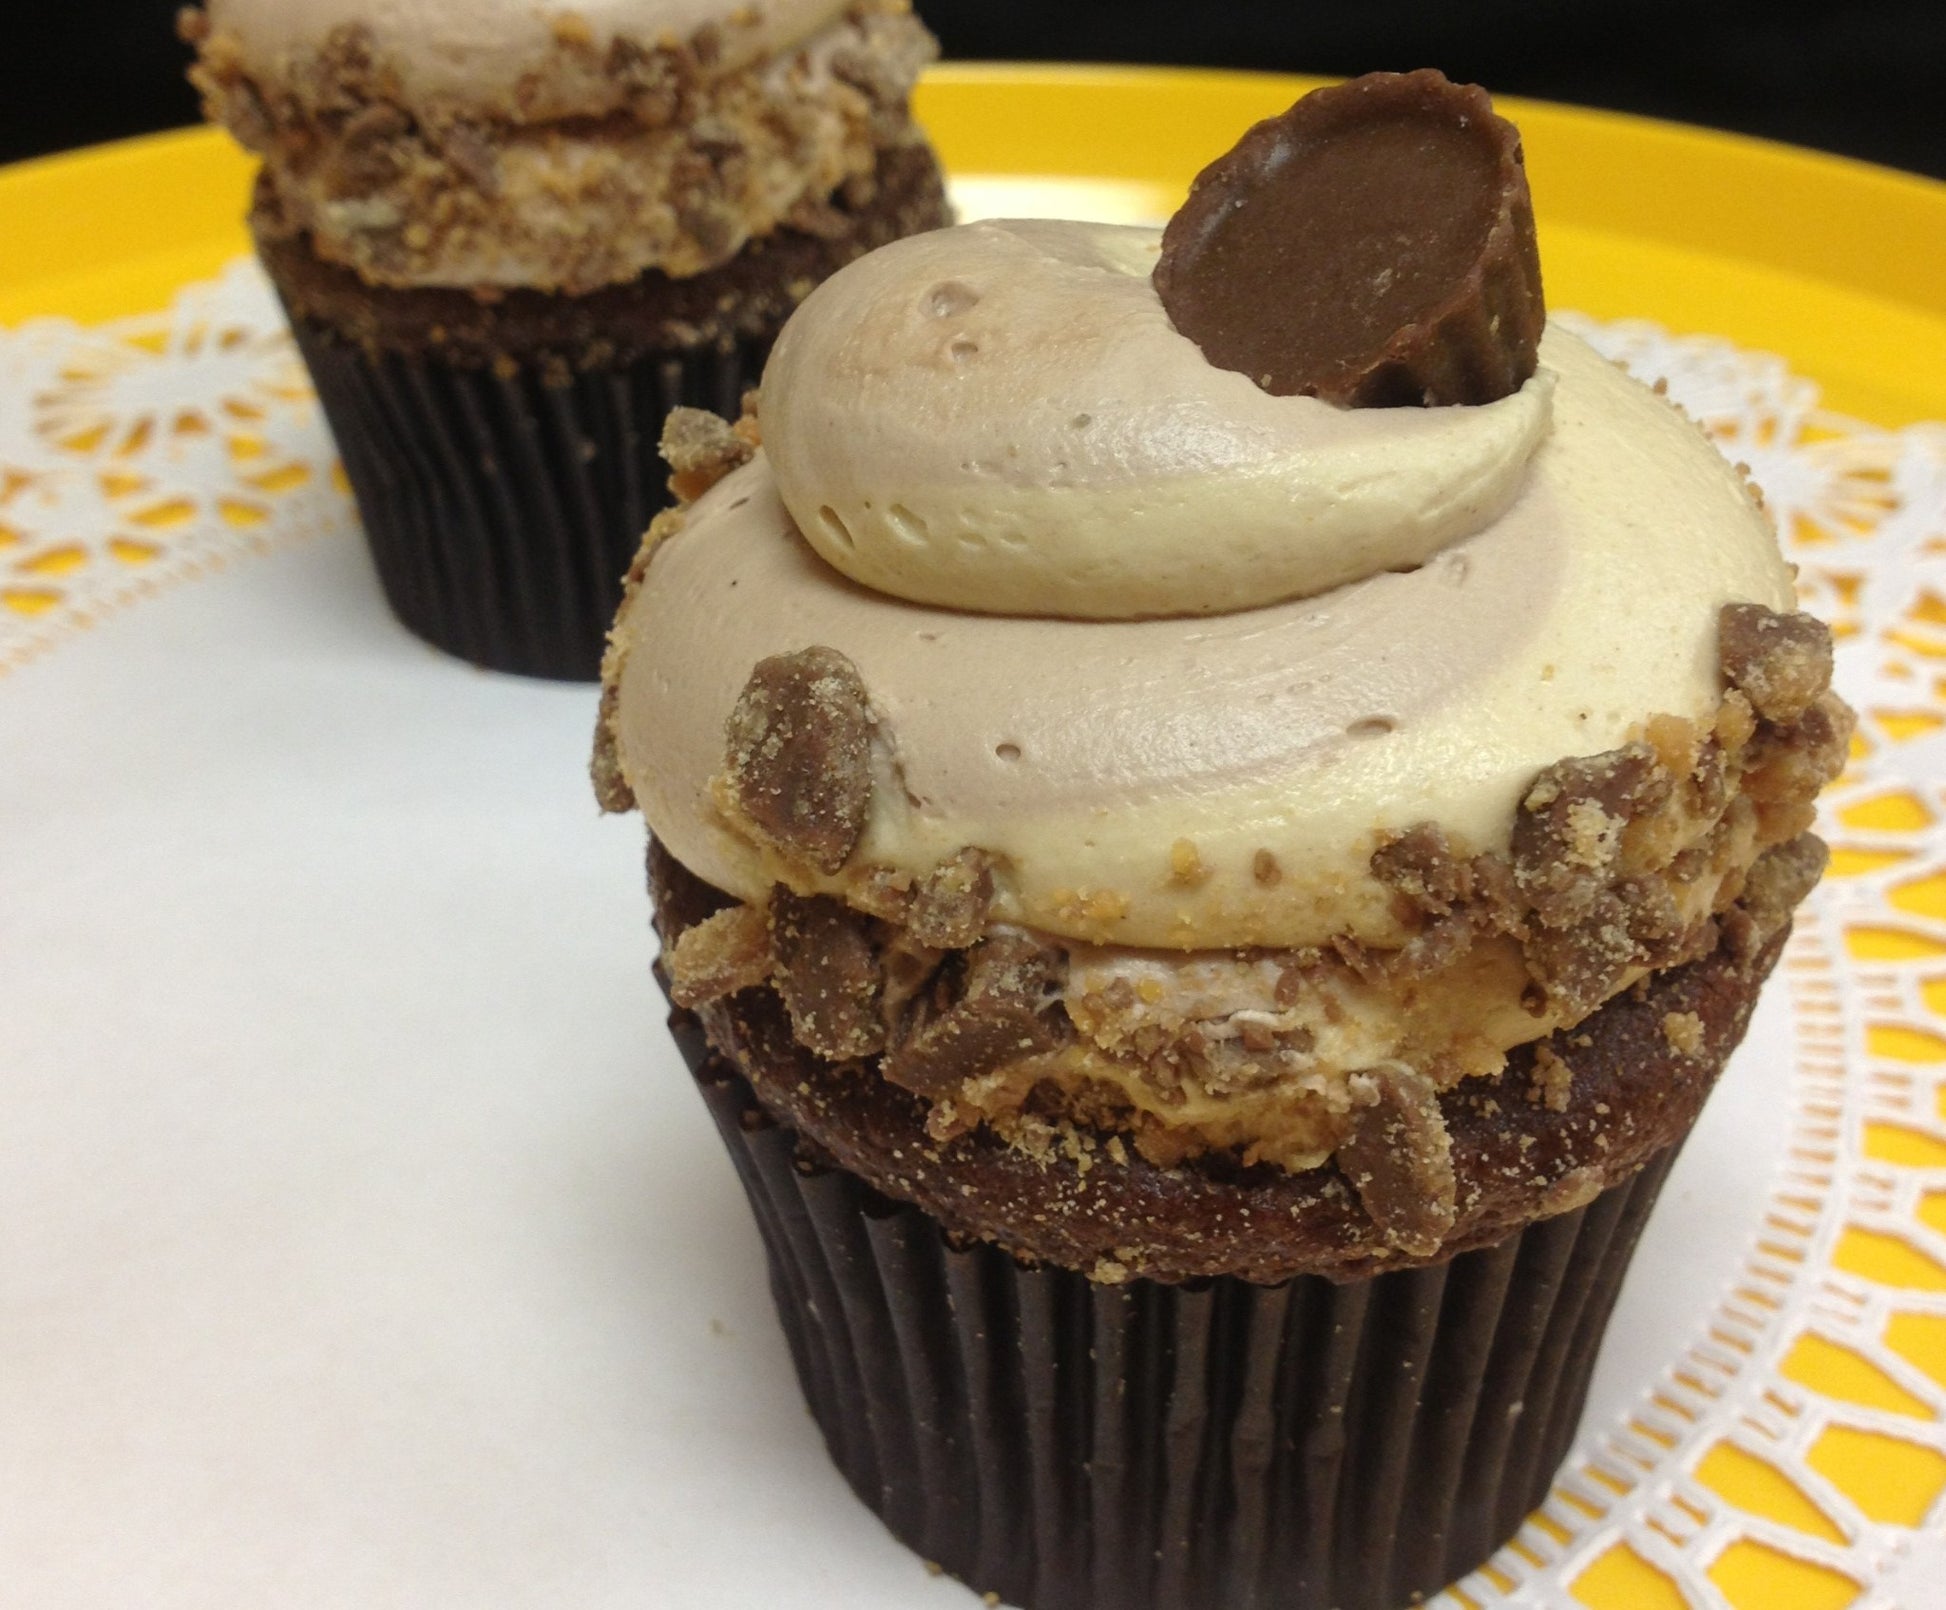 Peanut Butter Cup Specialty Cupcake